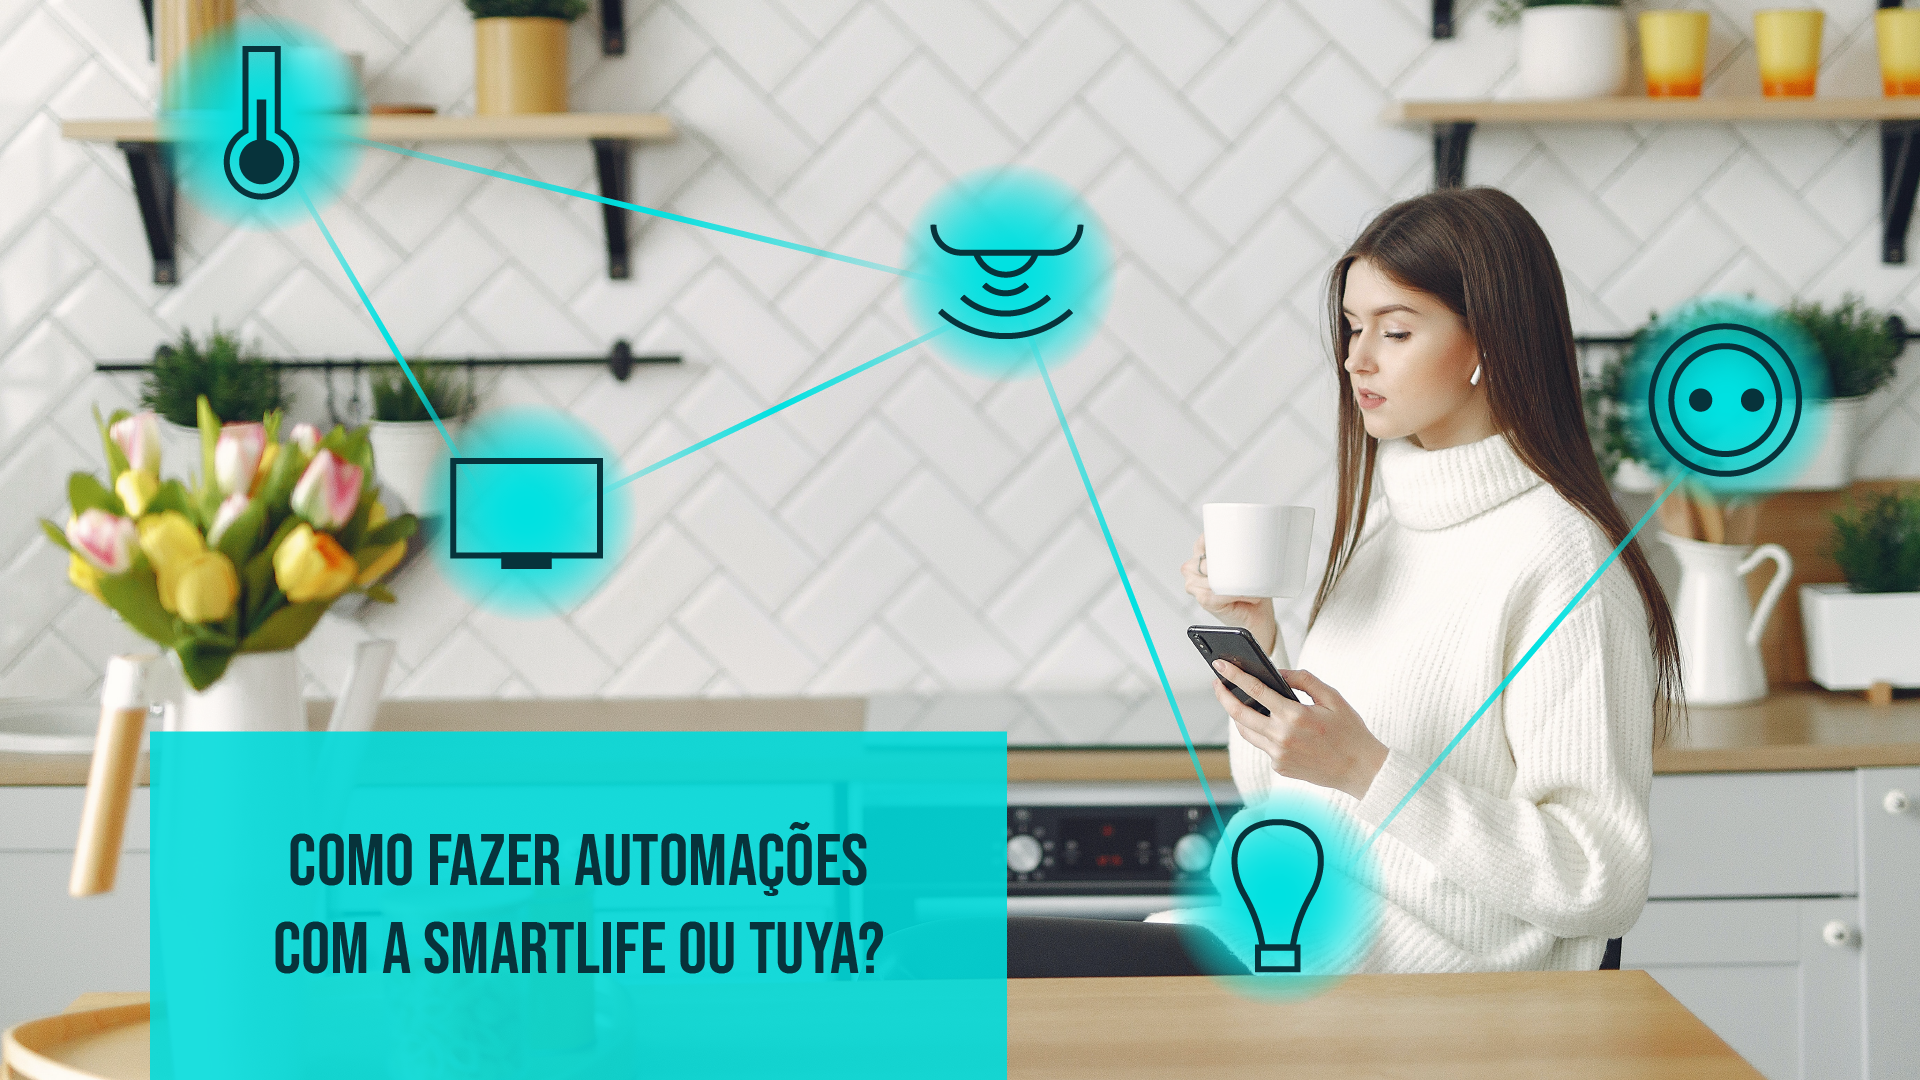 Integrate Tuya/Smart Life into Home Assistant easily. 